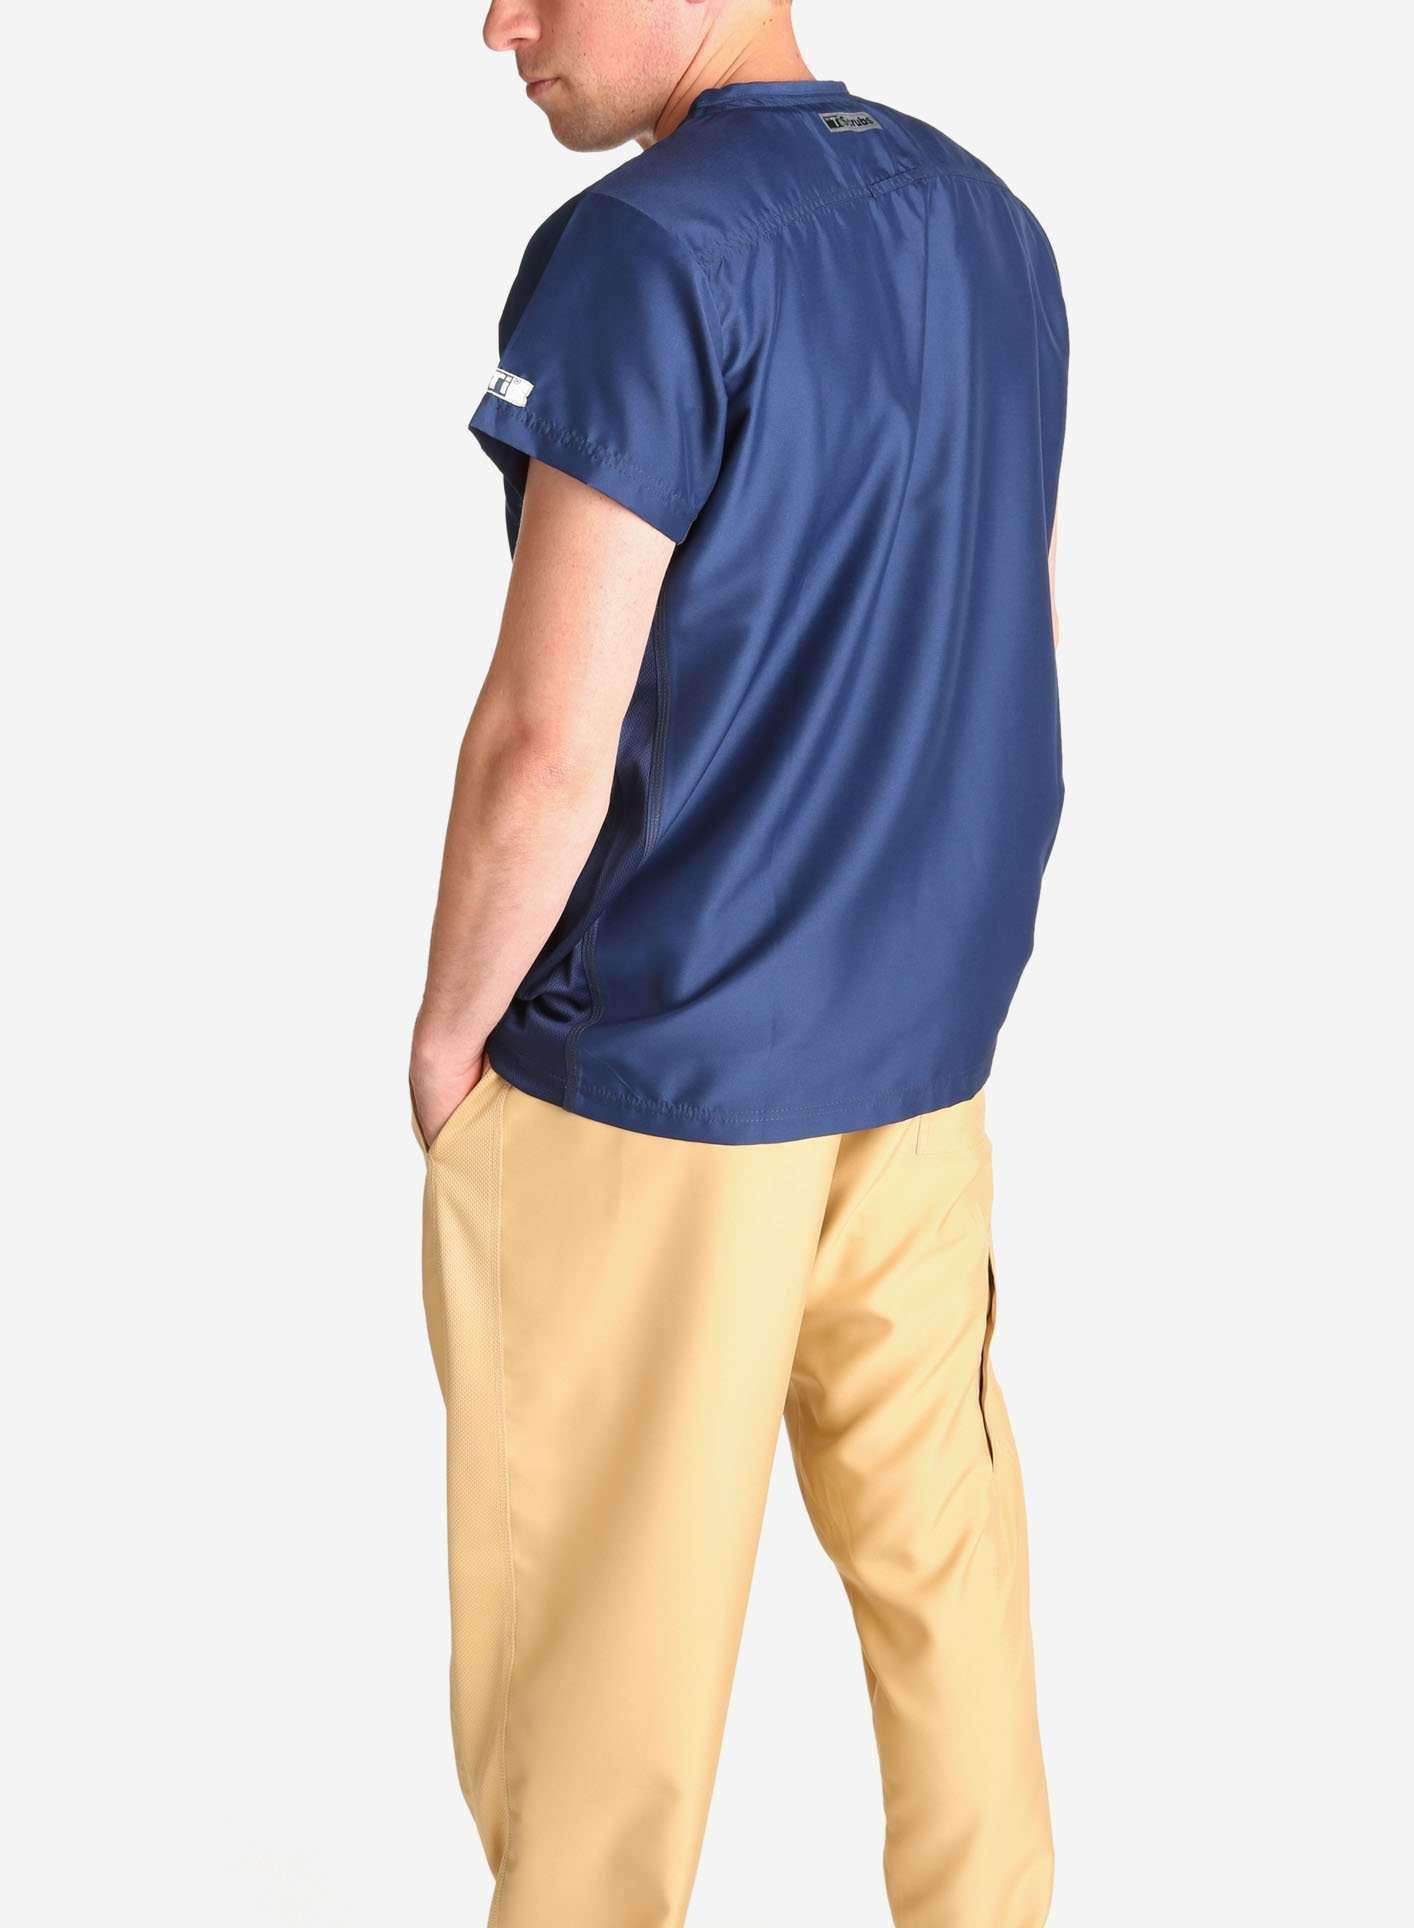 Perma Color Pima Twill Khaki Pants in Cadet Blue, Size 42 (Atwater Mod